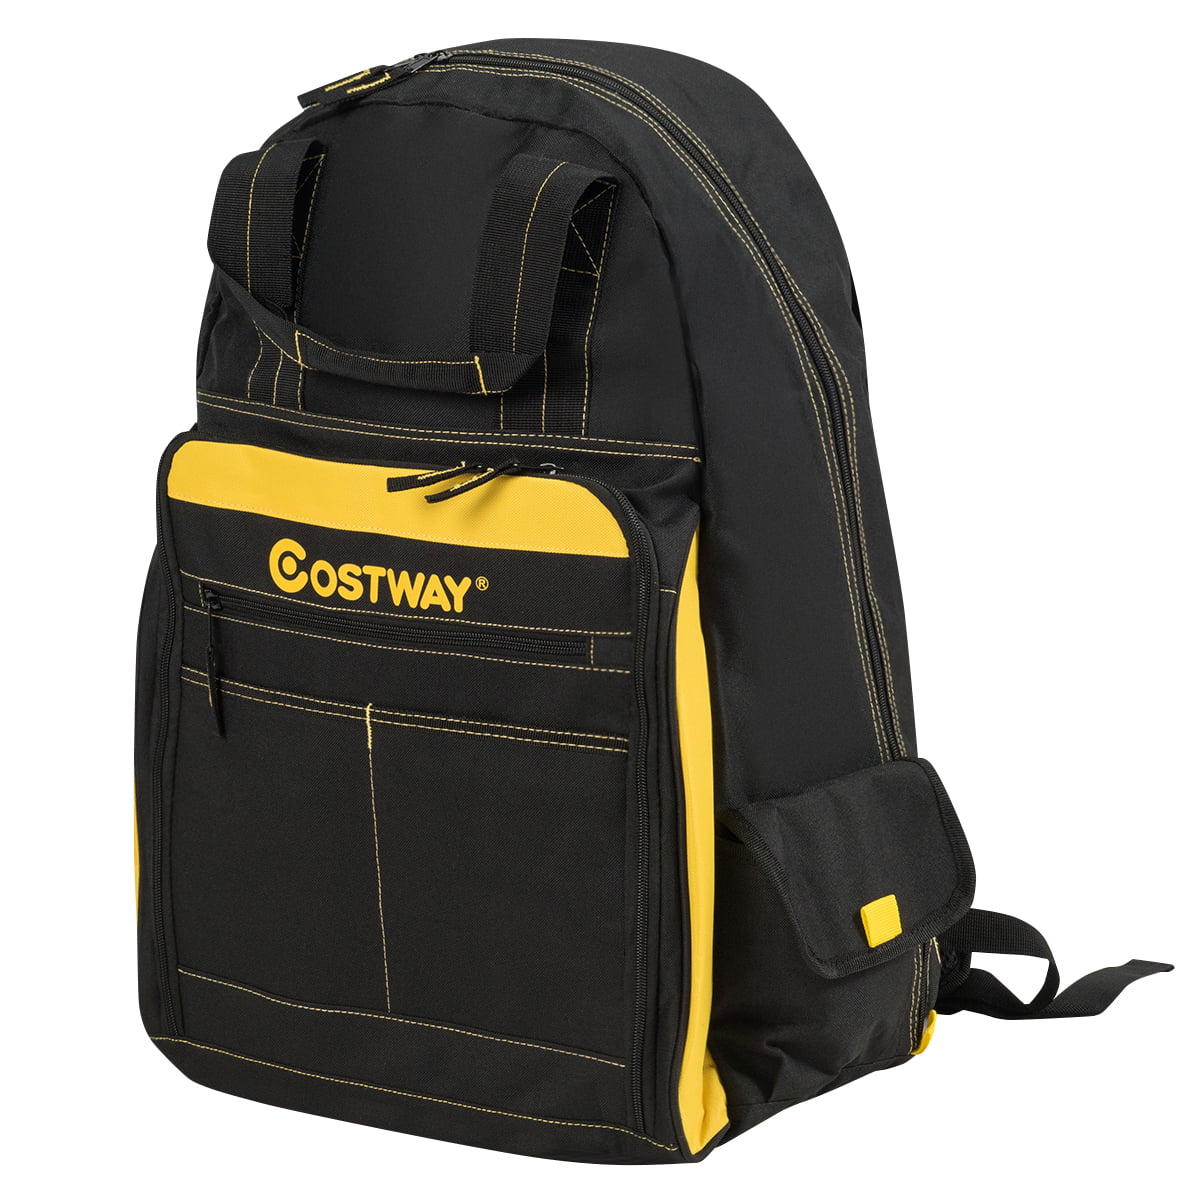 Costway 48-Pocket Heavy-Duty Tool Backpack Padded Back Support Jobsite ...